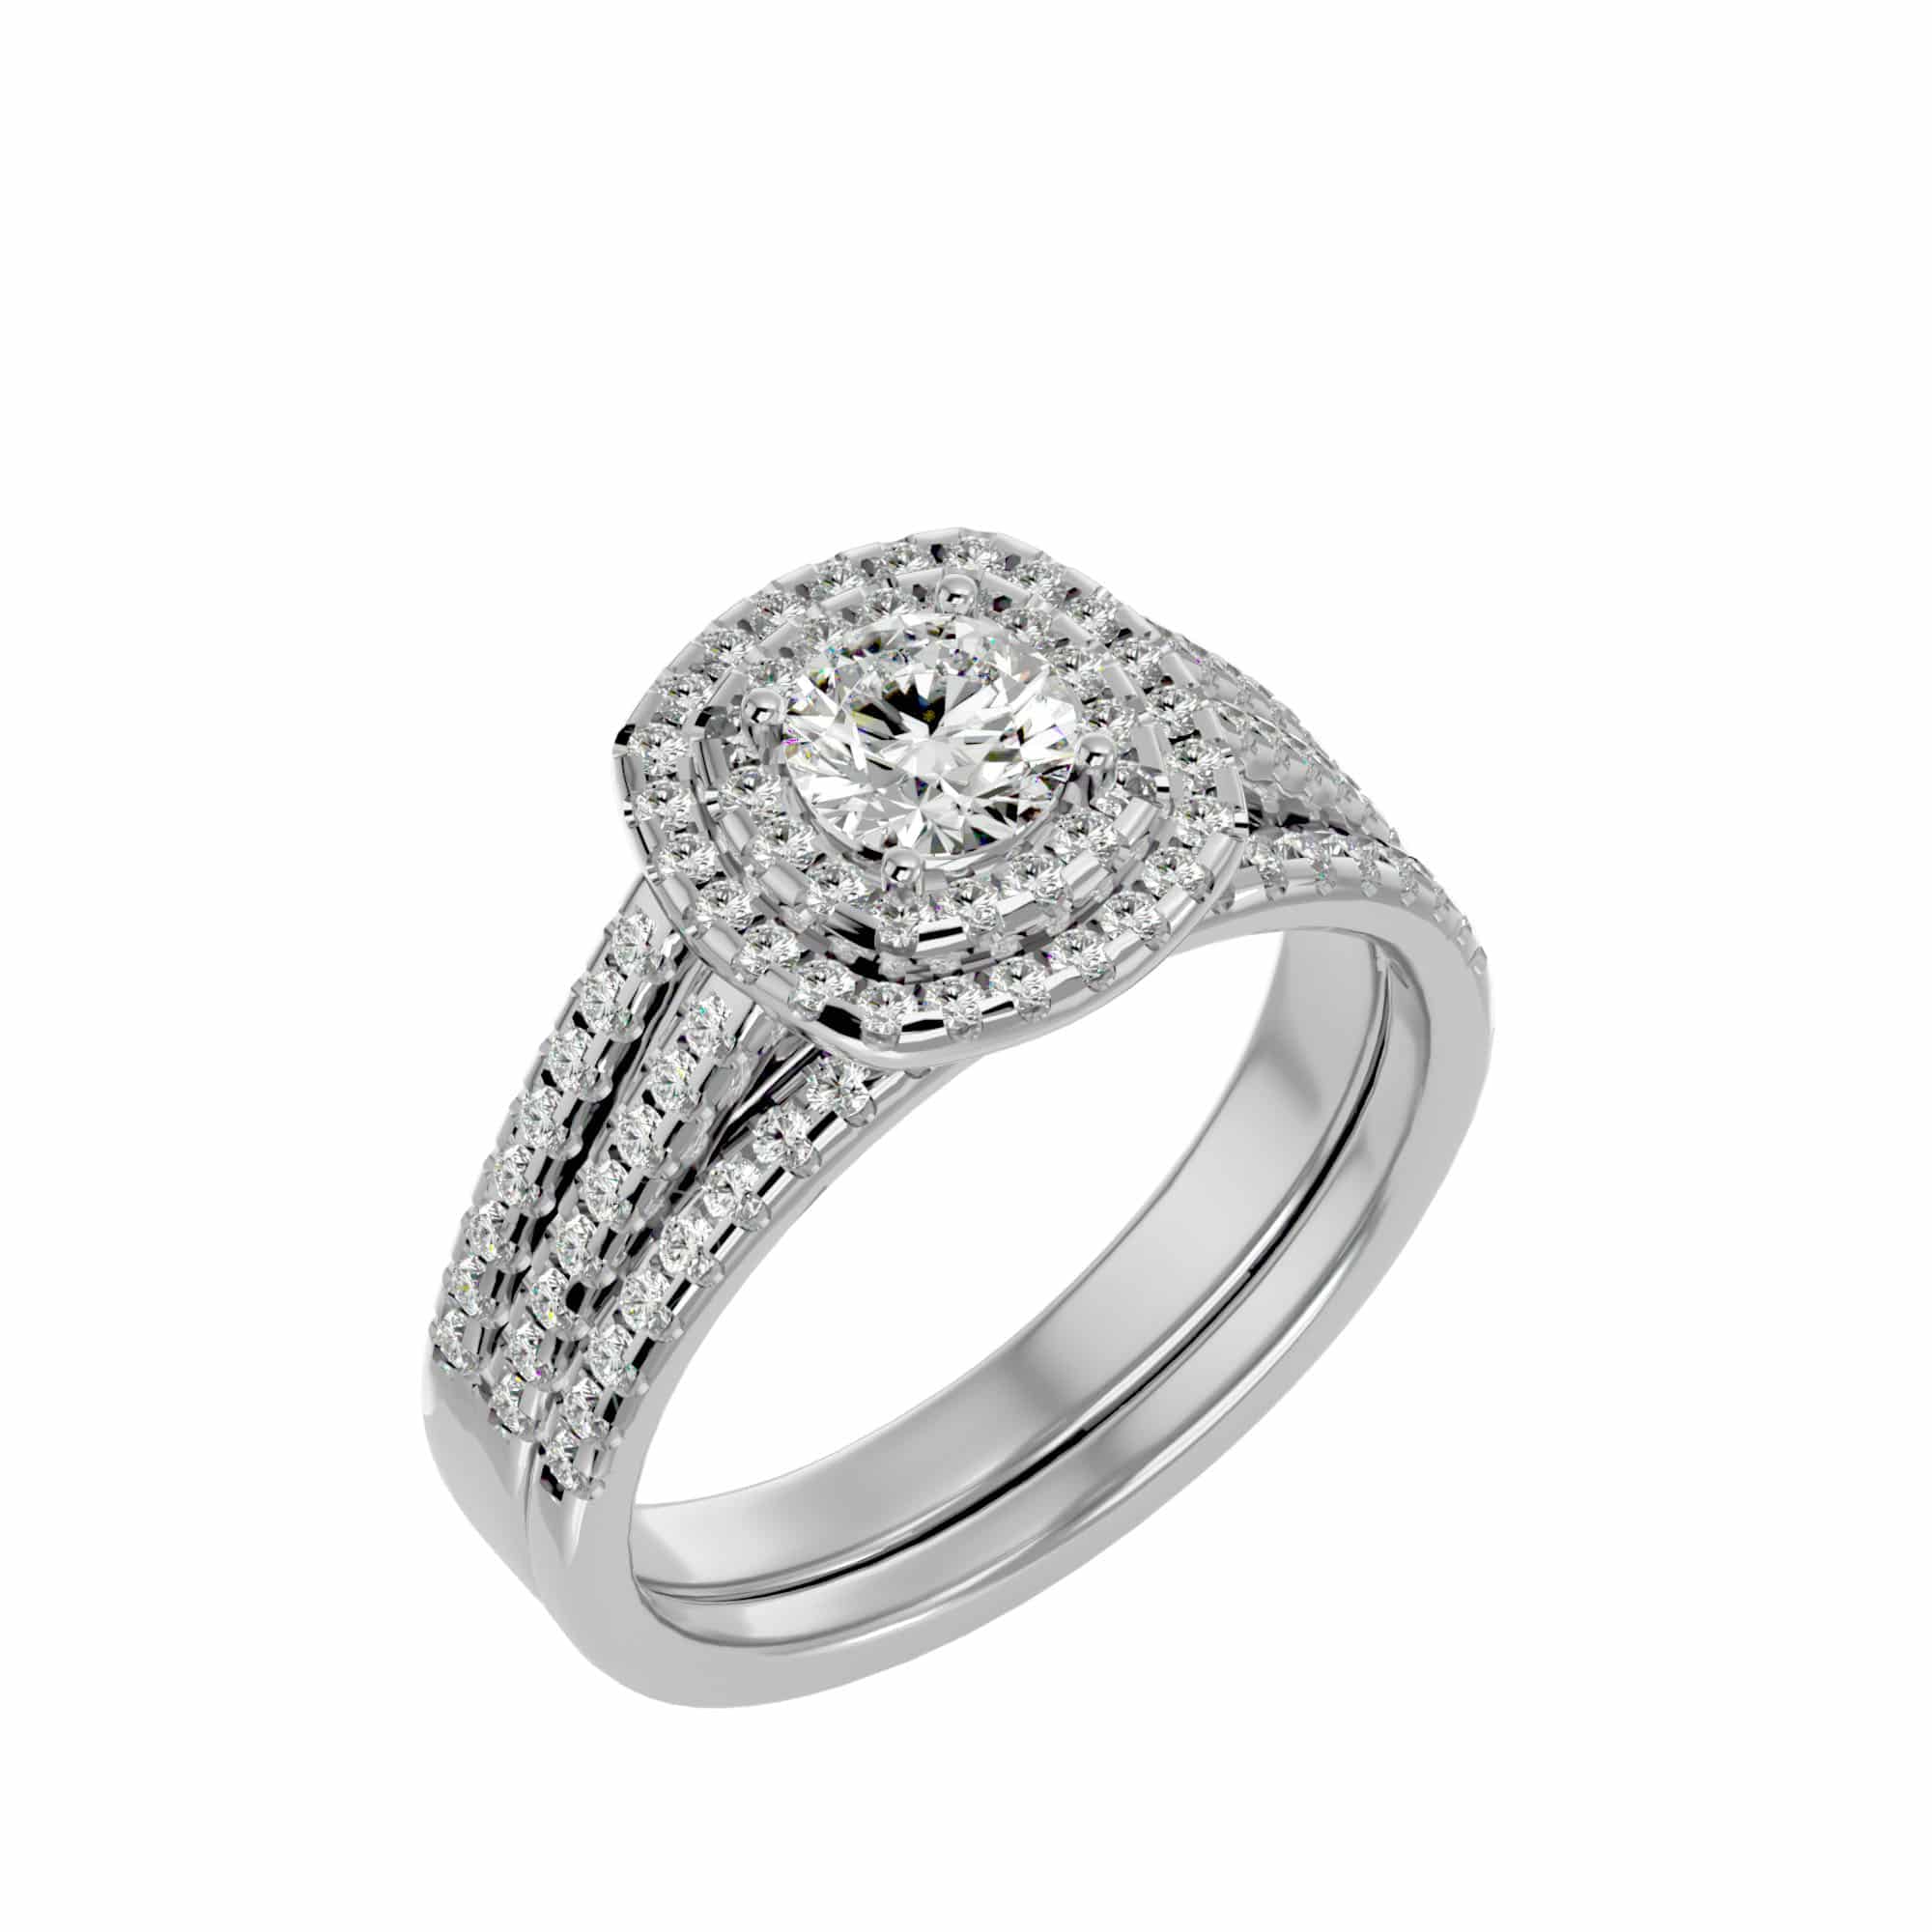 Open Shank Halo Engagement Ring With Matching Wedding Band